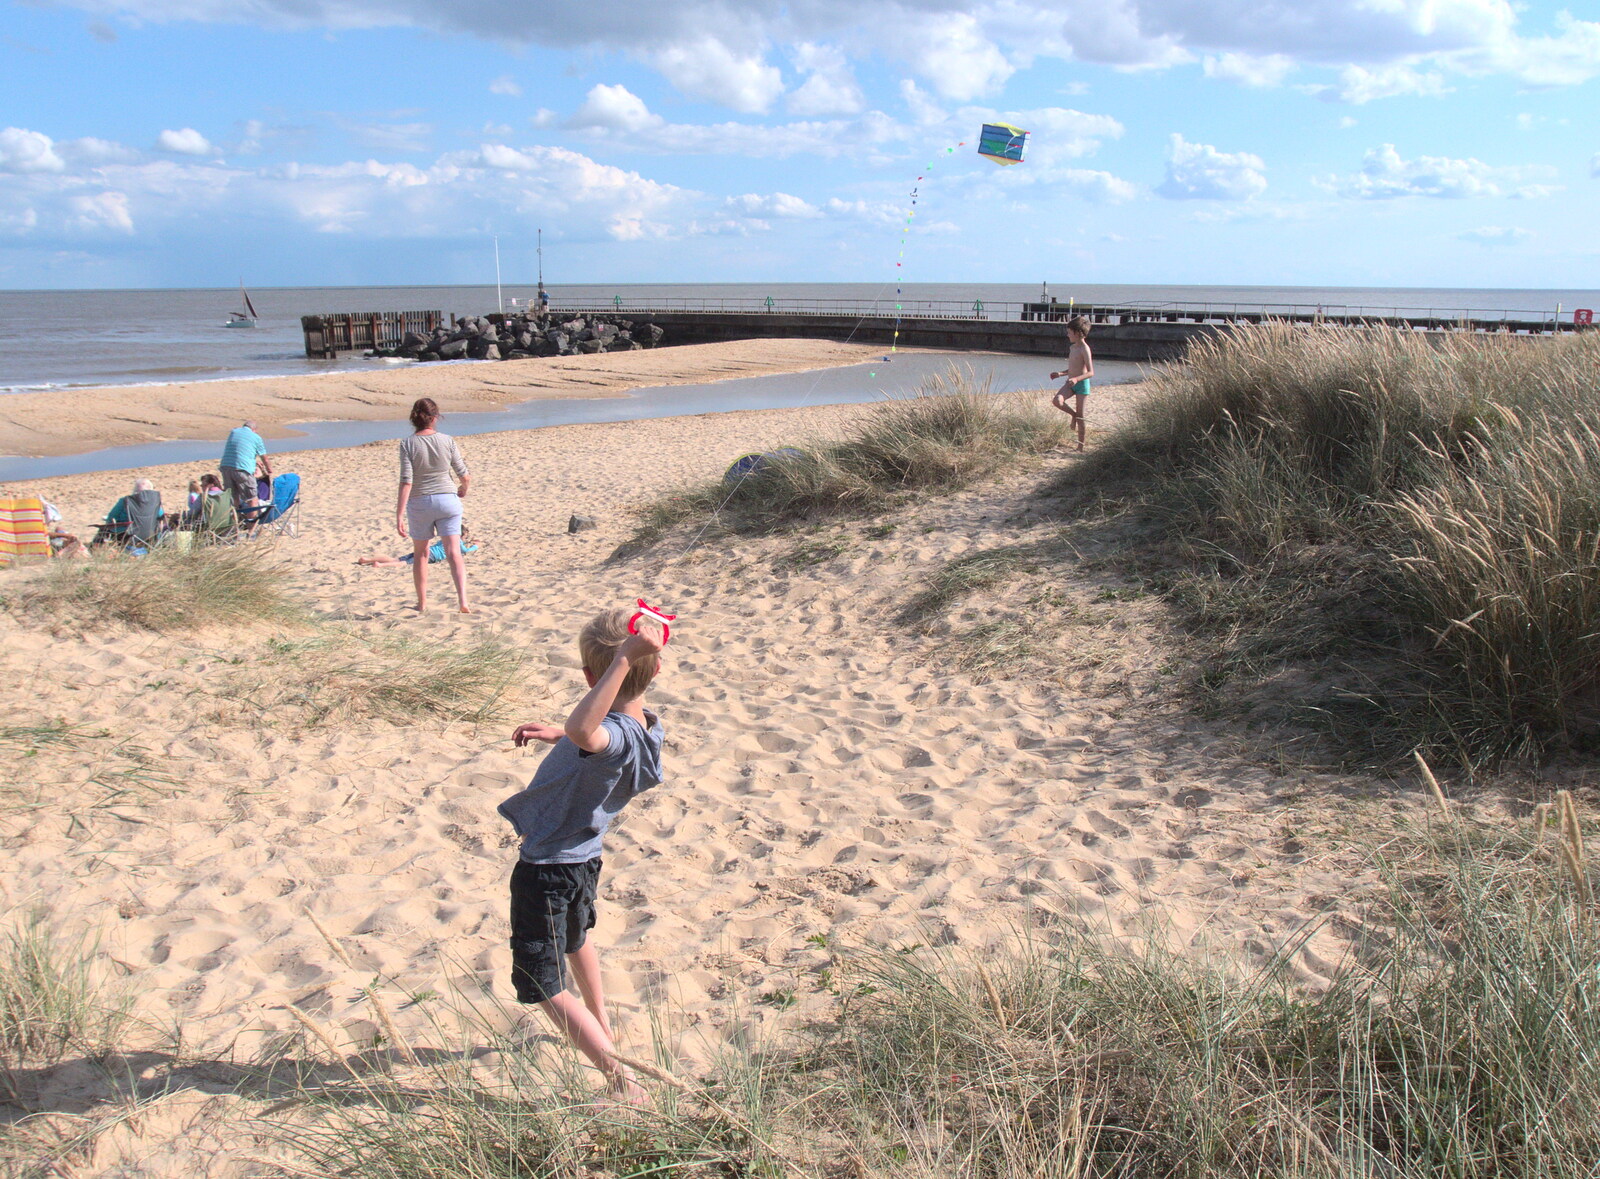 More kite action from Harry from A Day on the Beach, Southwold, Suffolk - 25th August 2018